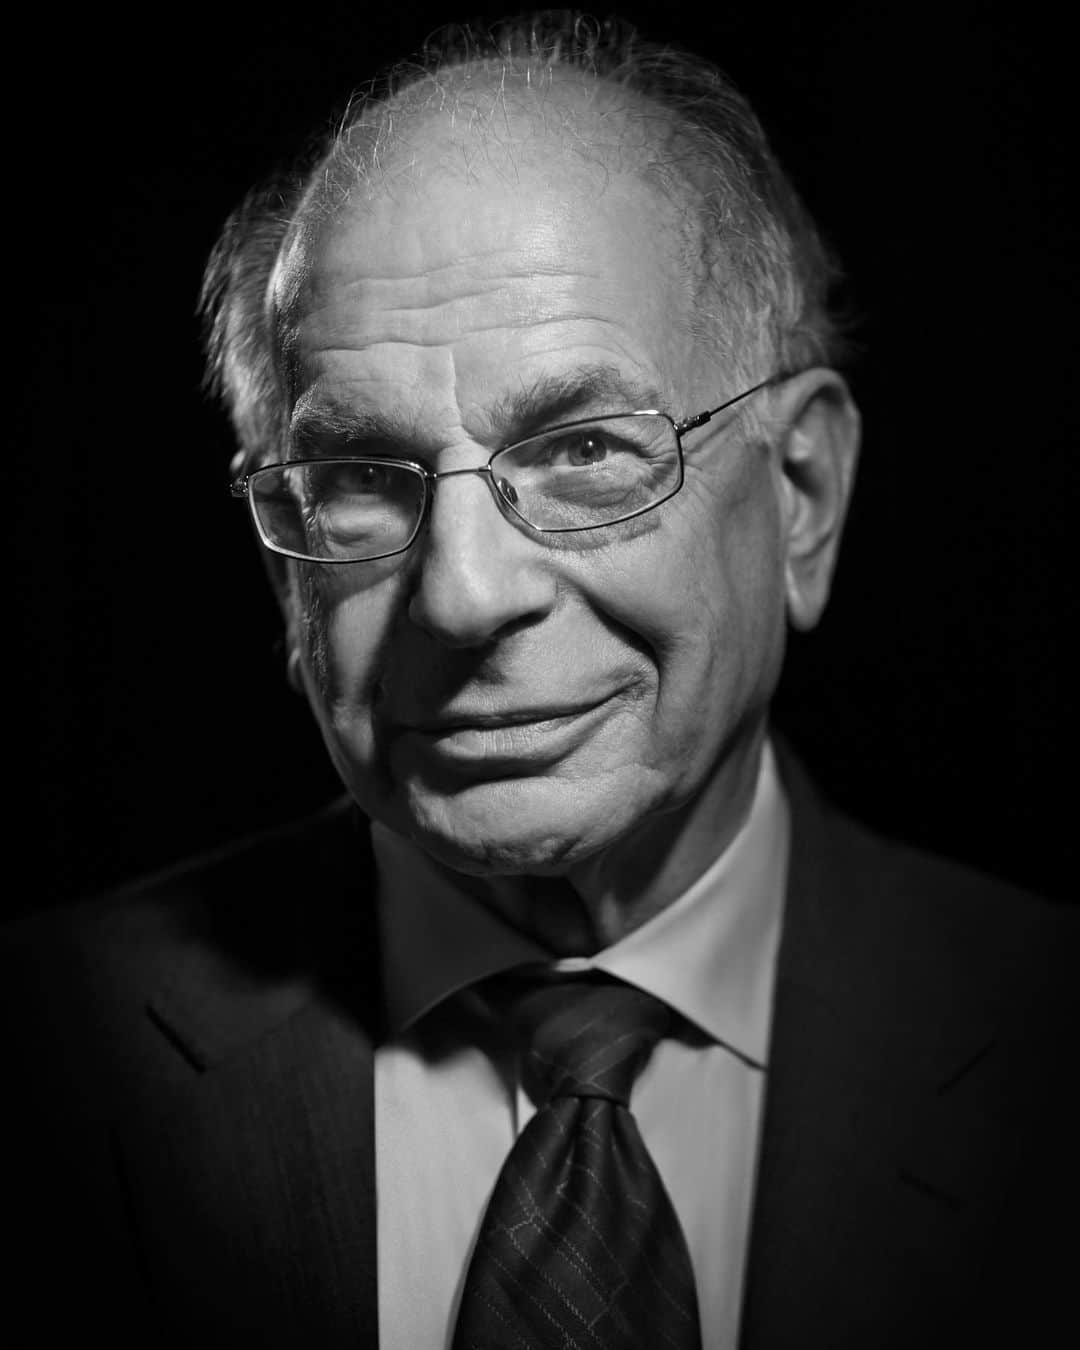 ZOO Magazineさんのインスタグラム写真 - (ZOO MagazineInstagram)「ISSUE 68, MOTUS  Nobel laureate Prof. Daniel Kahneman – Professor Emeritus of Psychology and Public Affairs at Princeton University – is a towering figure in psychology, and cognitive psychology in particular. Over the years, Prof. Kahneman has reserved extensive attention to research on the complex definition of well-being and happiness, distinguishing two very different notions of selves: an experiencing self, and a remembering, evaluating self. However, it’s his seminal study on behavior that has laid the foundation for a new field of research, integrating economic analysis with fundamental insights from cognitive psychology. Prof. Kahneman proved how the human mind is not governed by an unrealistic concept of rationality in decision-making, which was a common assumption amongst economists for centuries. For these discoveries, Prof. Kahneman was awarded the Nobel Prize in Economic Sciences in 2002. These researches begun in the early 70s and were conducted together with an esteemed colleague, the late Amos Tversky, who regrettably passed away suddenly in 1996. Over the years, Kahneman and Tversky proved through a series of extensive experiments how people are incapable of fully analyzing complex decisions in situations when the future consequences are uncertain. The human mind relies on heuristic shortcuts, intuitions that inevitably lead to error. But more importantly, this research has proved how individuals are very sensitive to the way in which an outcome deviates from a reference level more than to the absolute outcome. And how our memory plays a very important role. As the research developed over the years, it shed light on the processes of the human mind when making decisions, understanding “the marvels as well as the flaws of intuitive thought”.  Interview by @manuelamartorelli   Photographer Denise Applewhite, Princeton University, Office of Communications. @princeton   #motus #zoomagazineissue68 #professor #nobelprizewinner #psychology #blackandwhite #blackandwhitephotography #zoomagazine #academic #princetonuniversity #movement #progress #flux #dynamism #memory #theory #academia #interview #magazine #zoo #economicsciences #economics #prizewinner」10月7日 22時58分 - zoomagazine